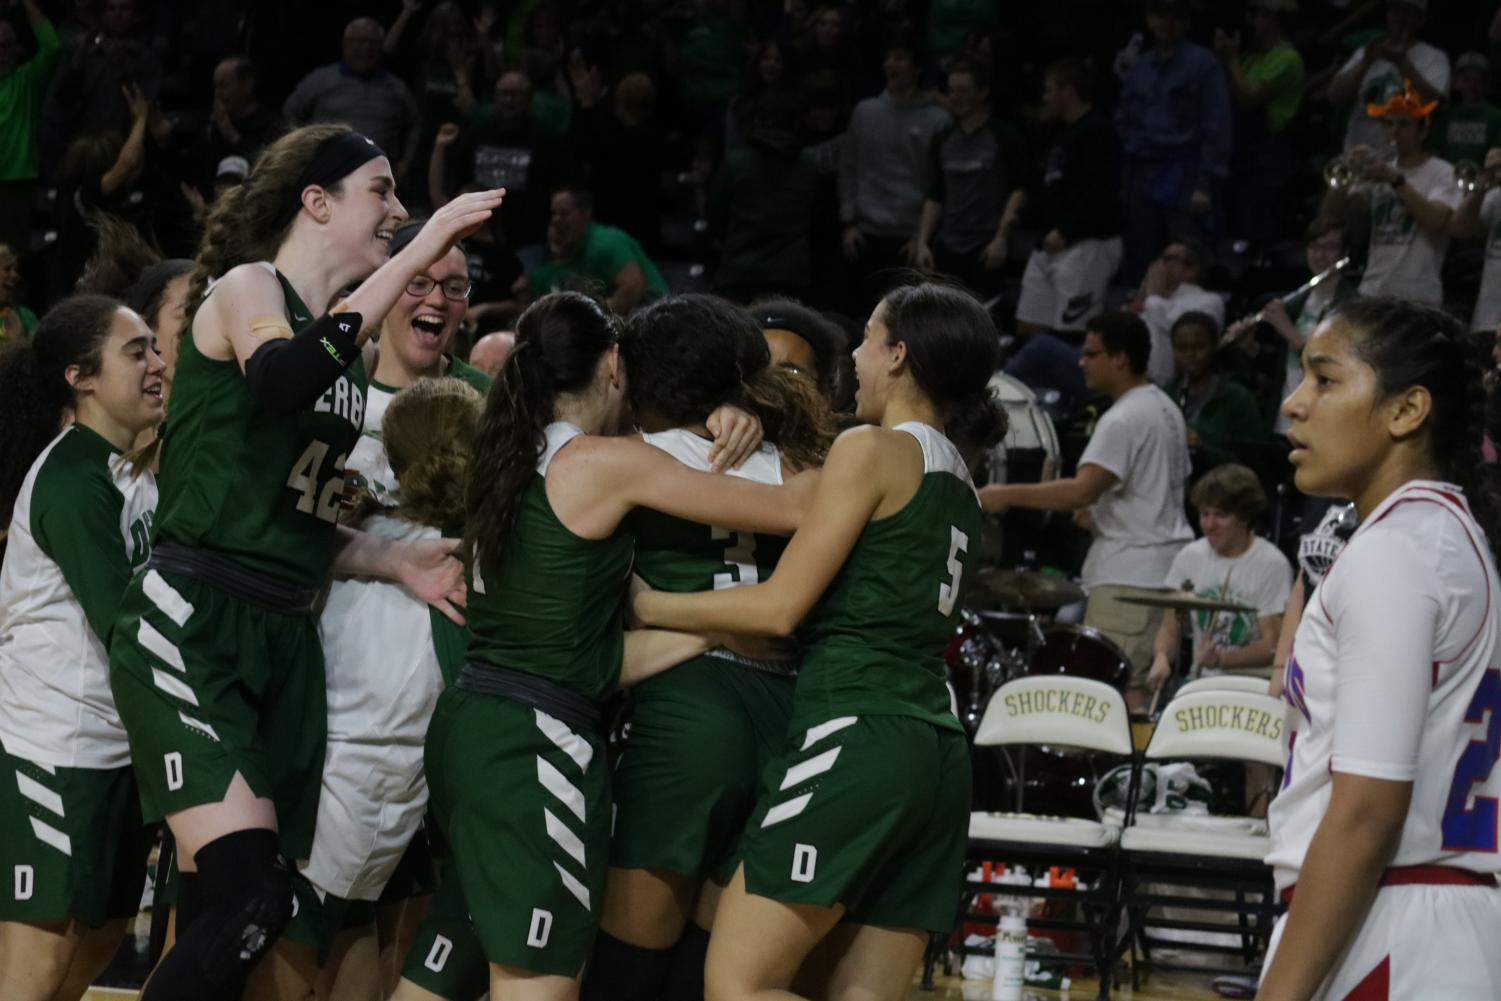 End+of+the+Derby+girls+basketball+game+against+Wichita+South%2C+state+semifinals+%28Photos+by+Brett+Jones%29